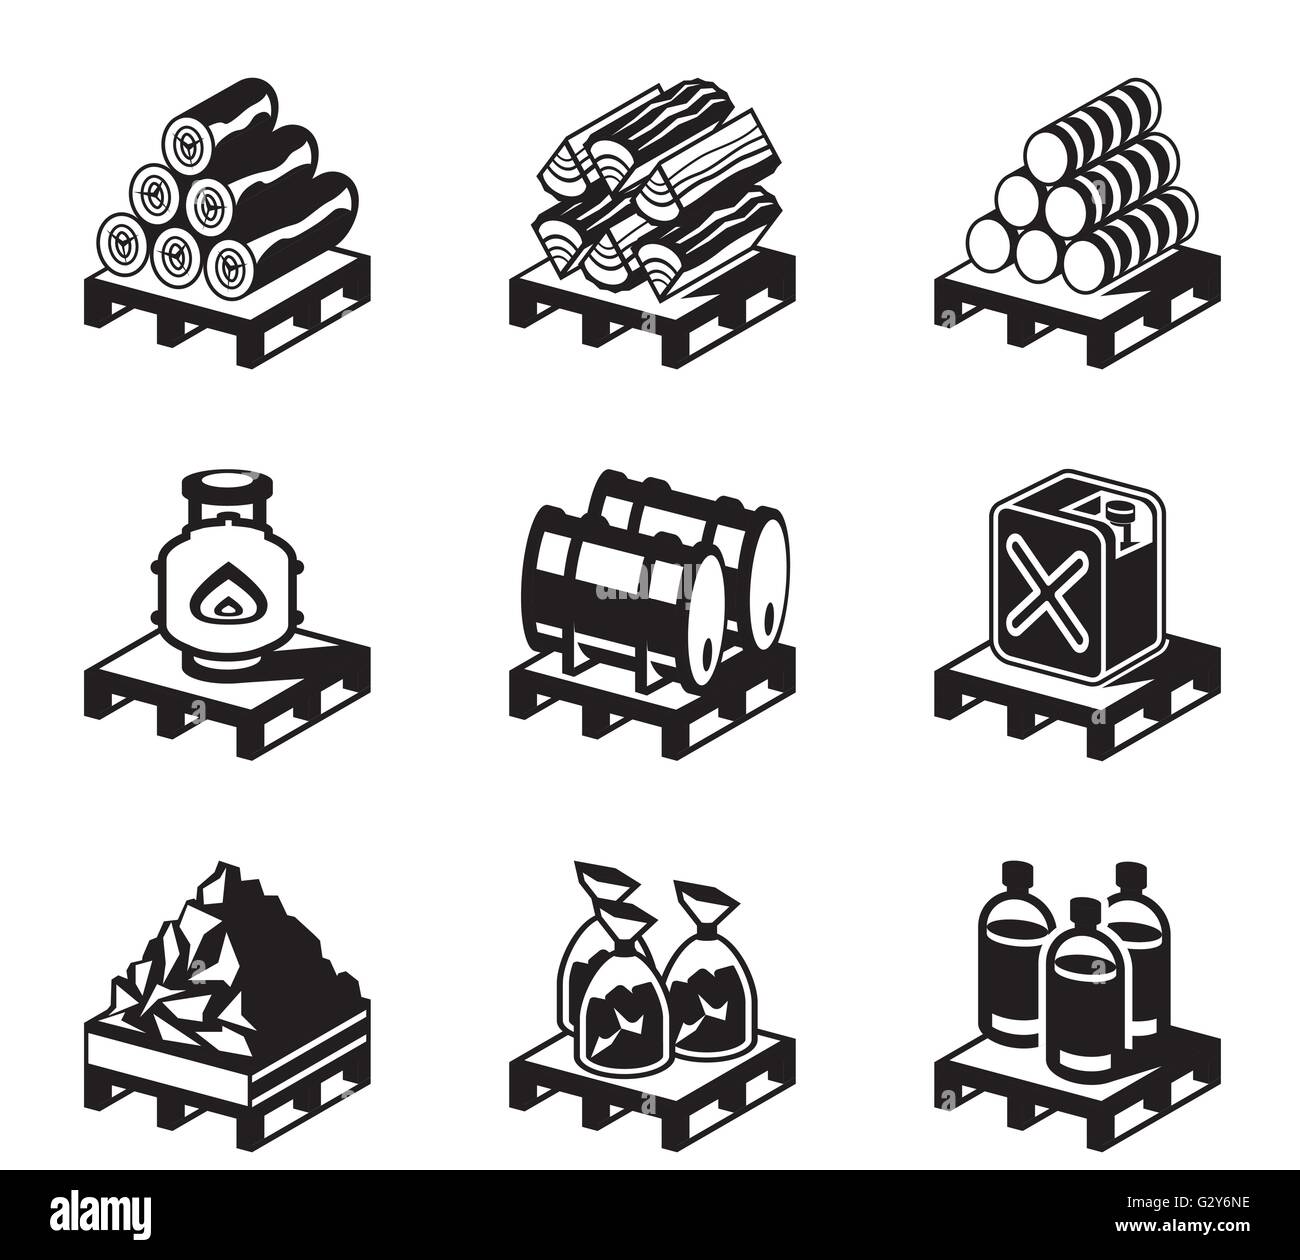 Solid fuel for domestic use - vector illustration Stock Vector